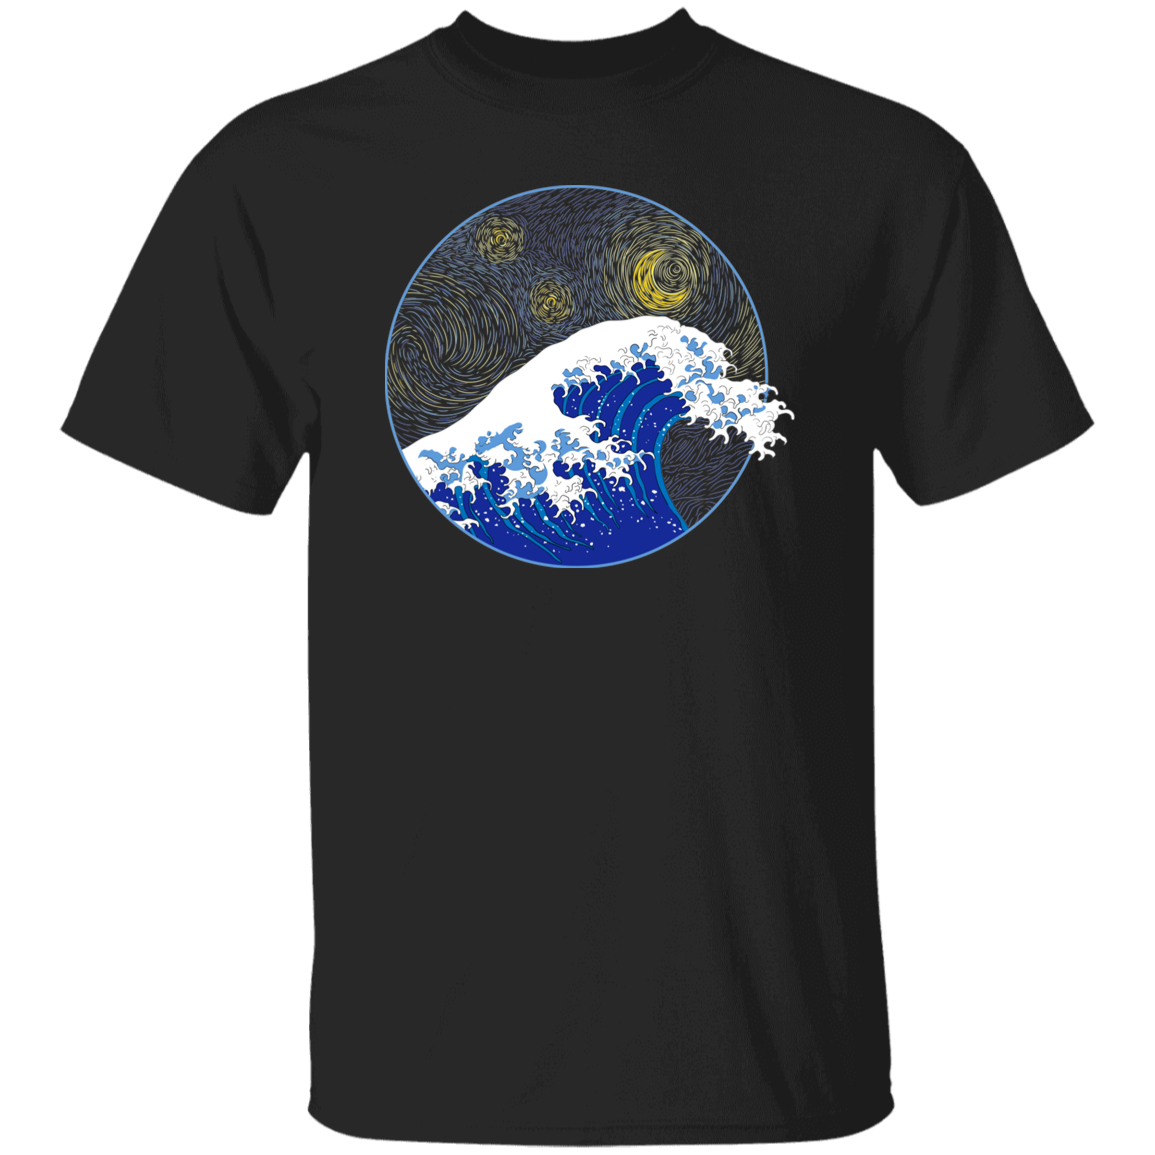 Great Starry Wave T-Shirt